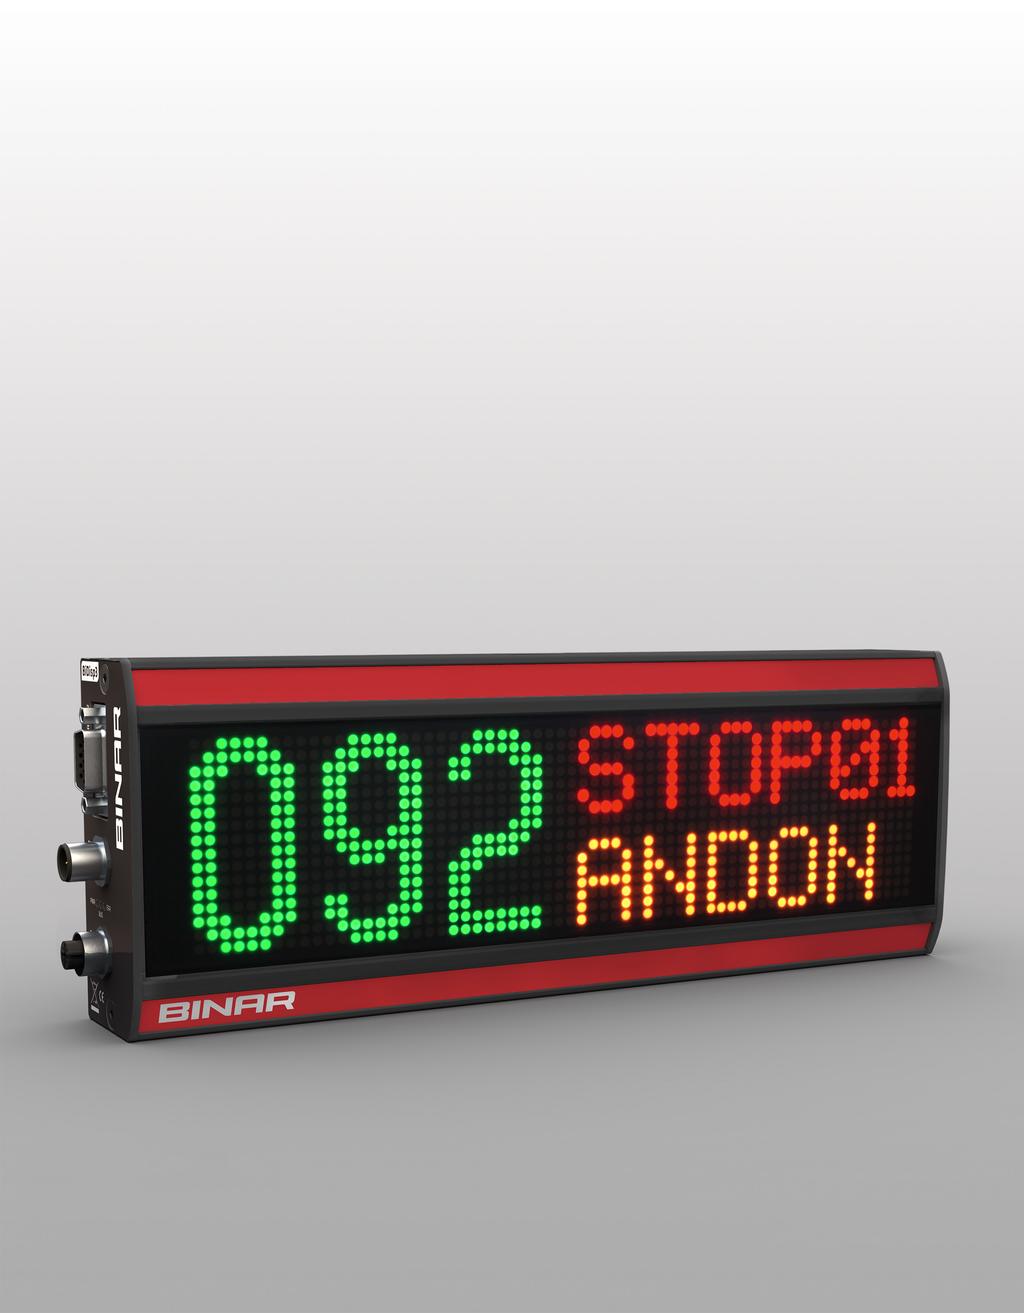 PRODUCTION SYSTEMS BiDisp A robust, flexible colour display for industrial applications Bright, full graphics LED matrix